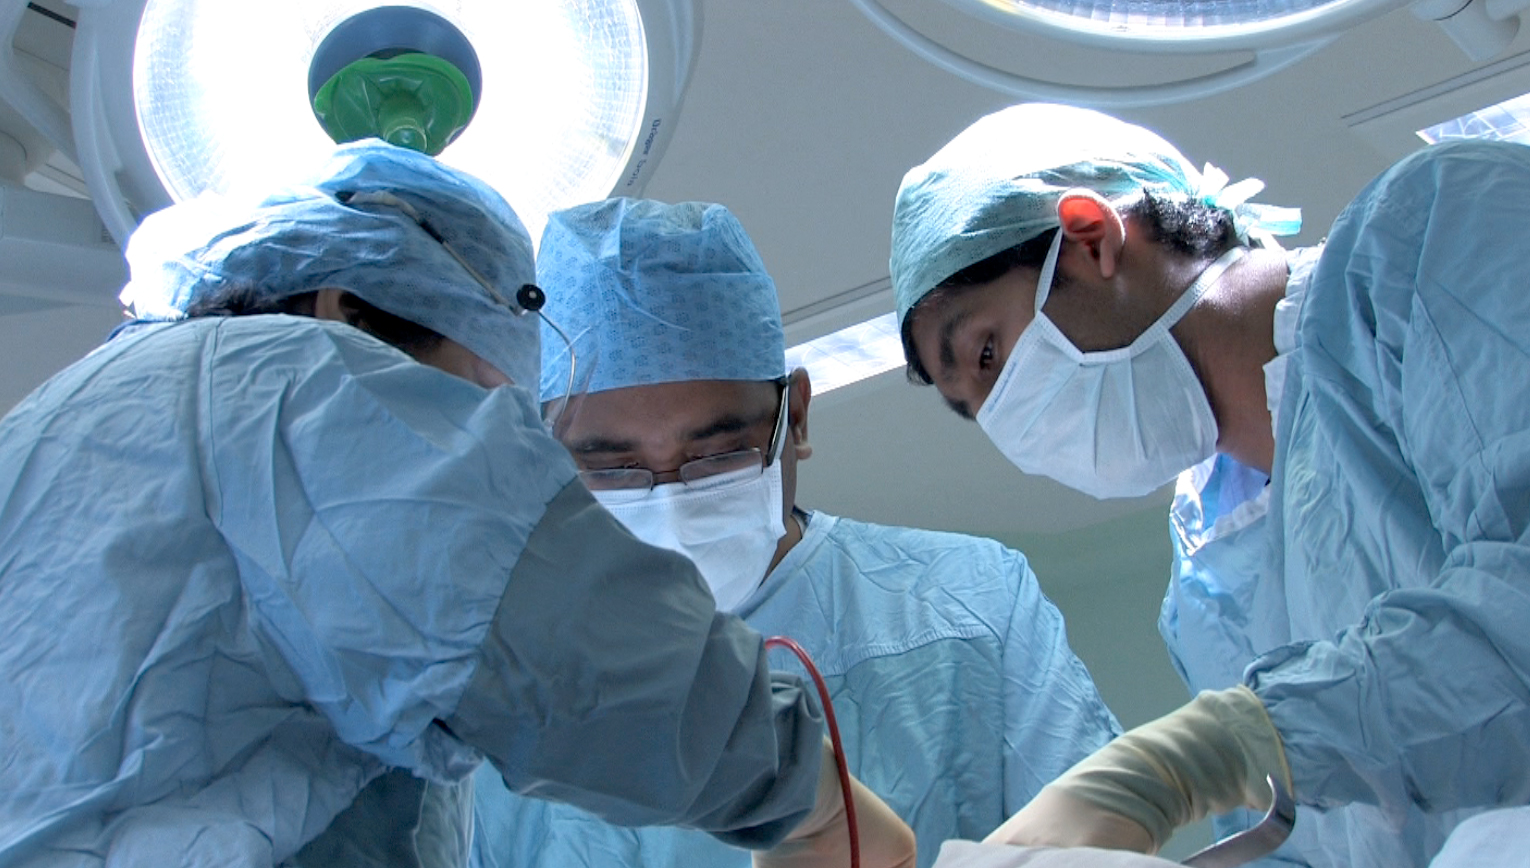 Surgeons performing a medical procedure in theatre